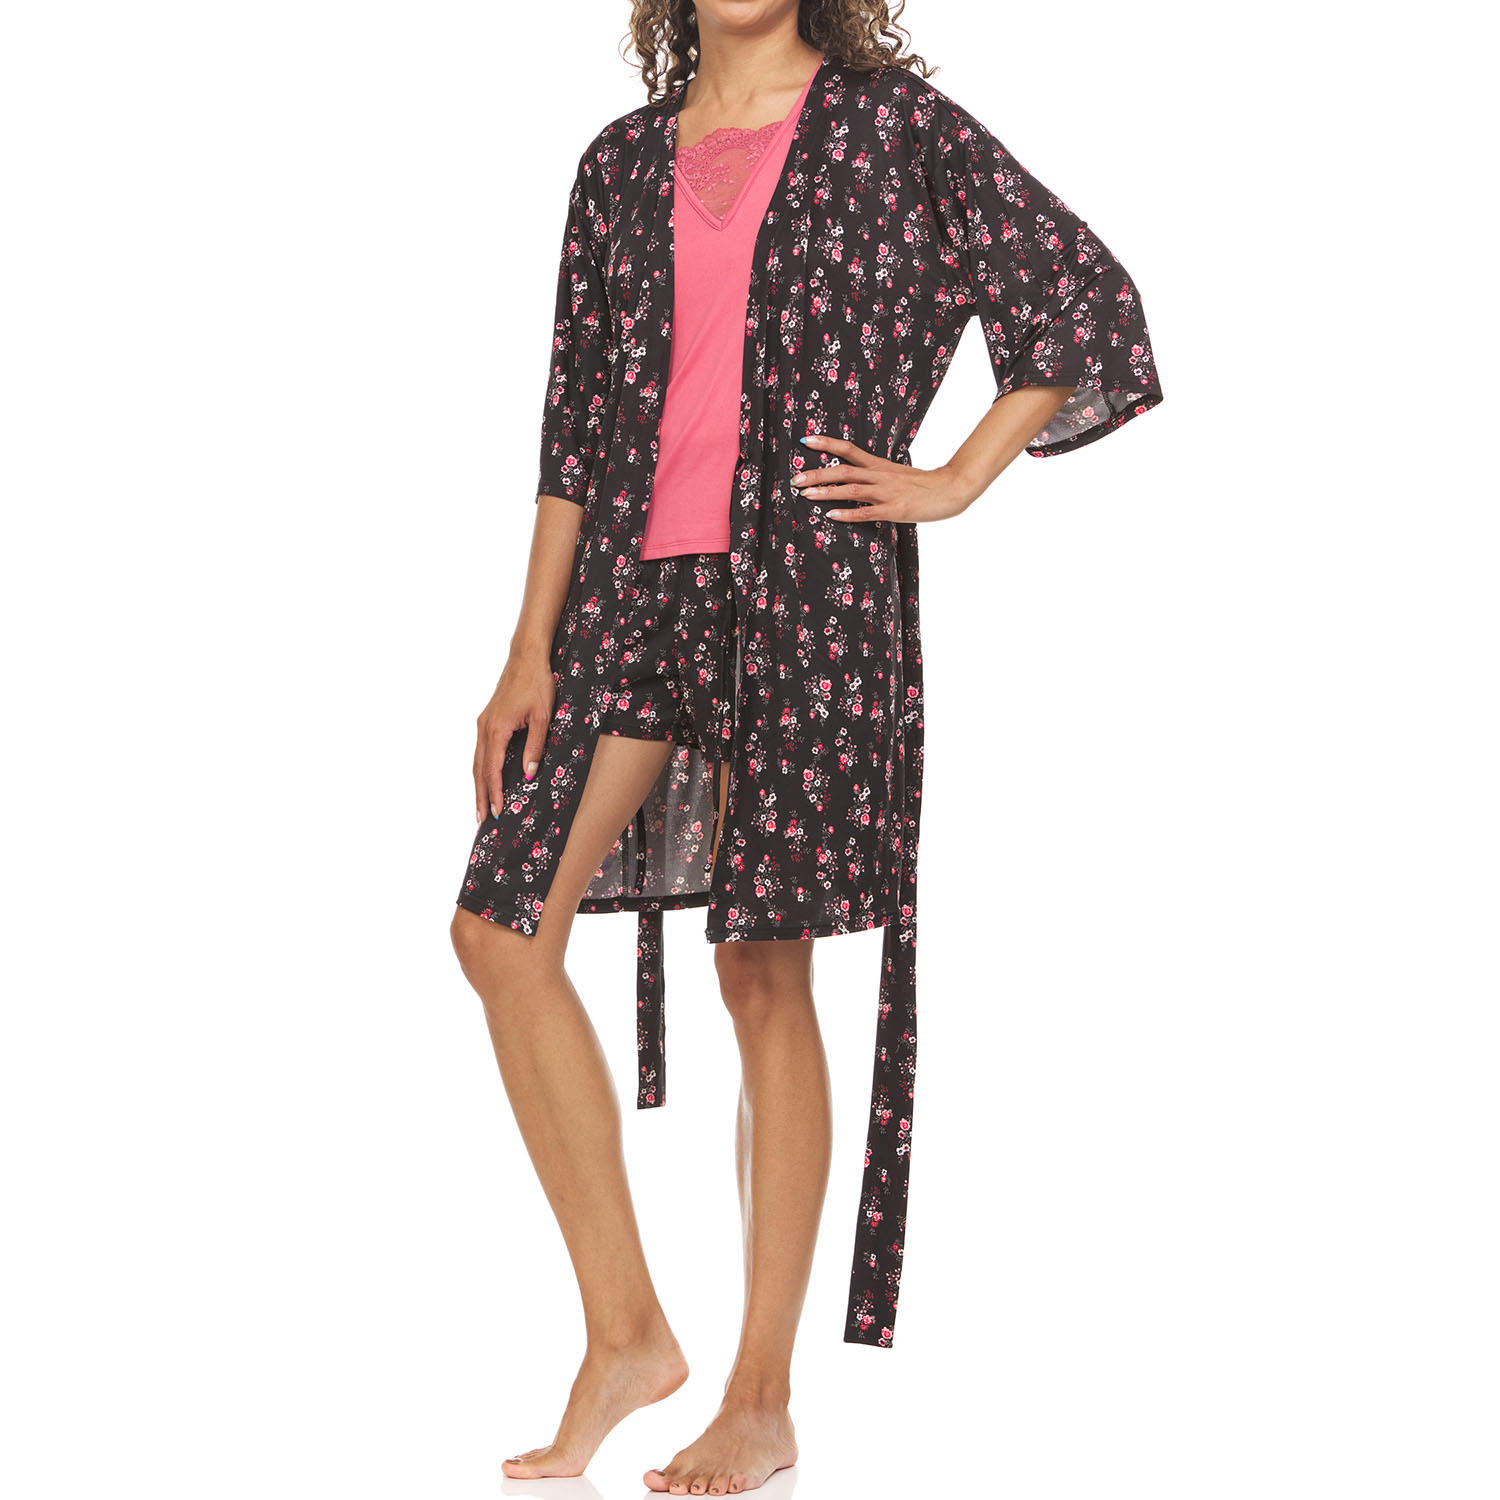  Flora by Flora Nikrooz 3 Piece Pajama Sets for $9.81